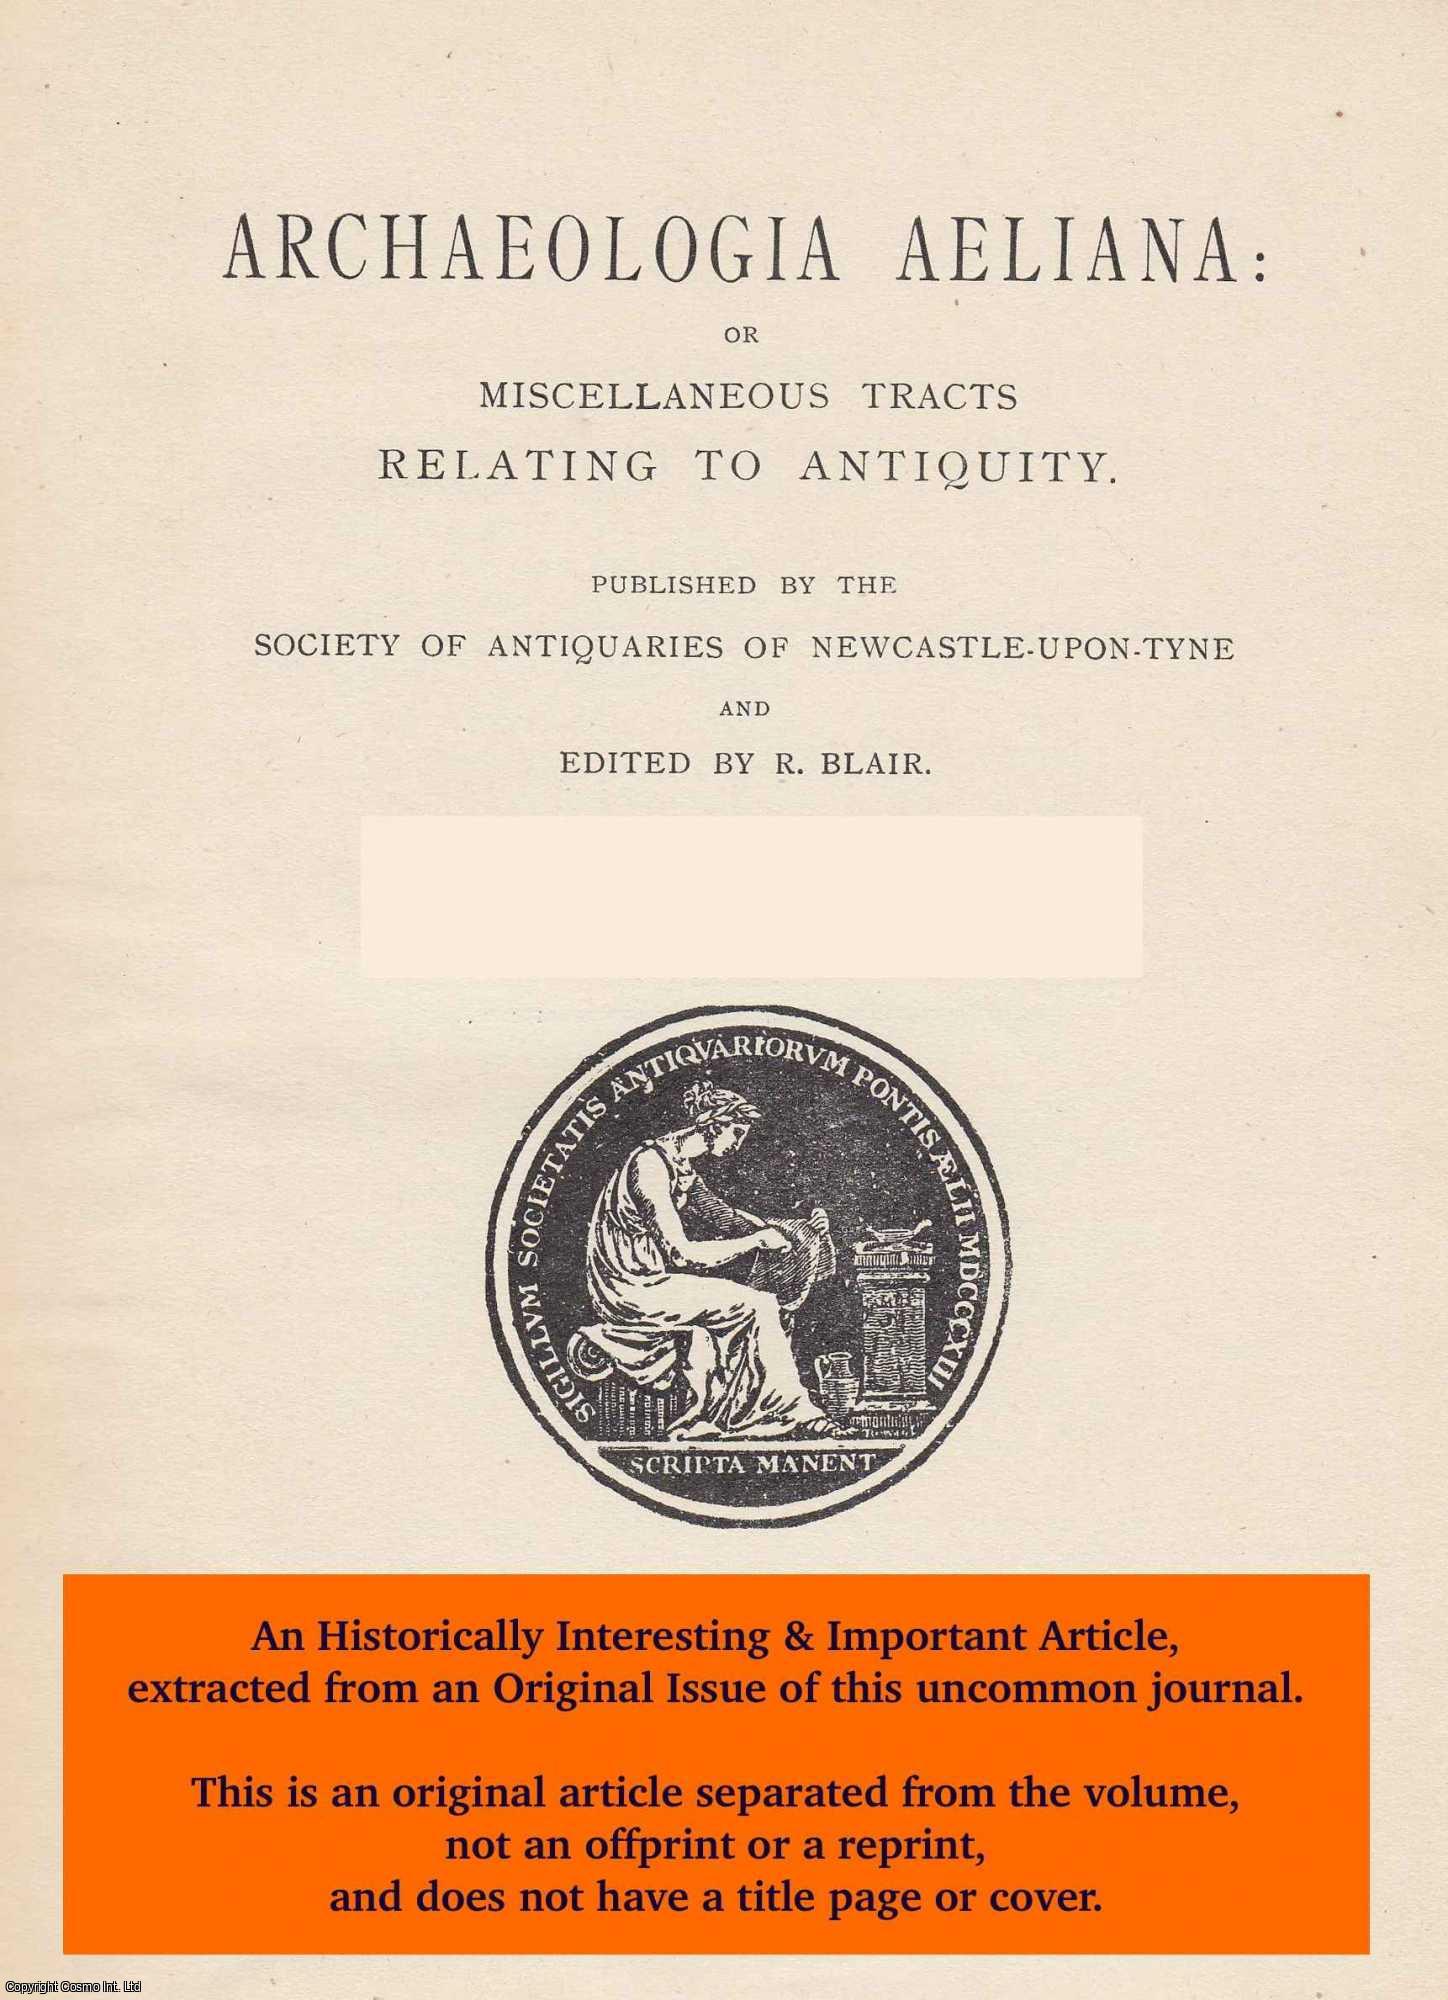 R. P. Wright, R. P. - The Stanegate at Walwick Grange. An original article from The Archaeologia Aeliana: or Miscellaneous Tracts Relating to Antiquity, 1939.